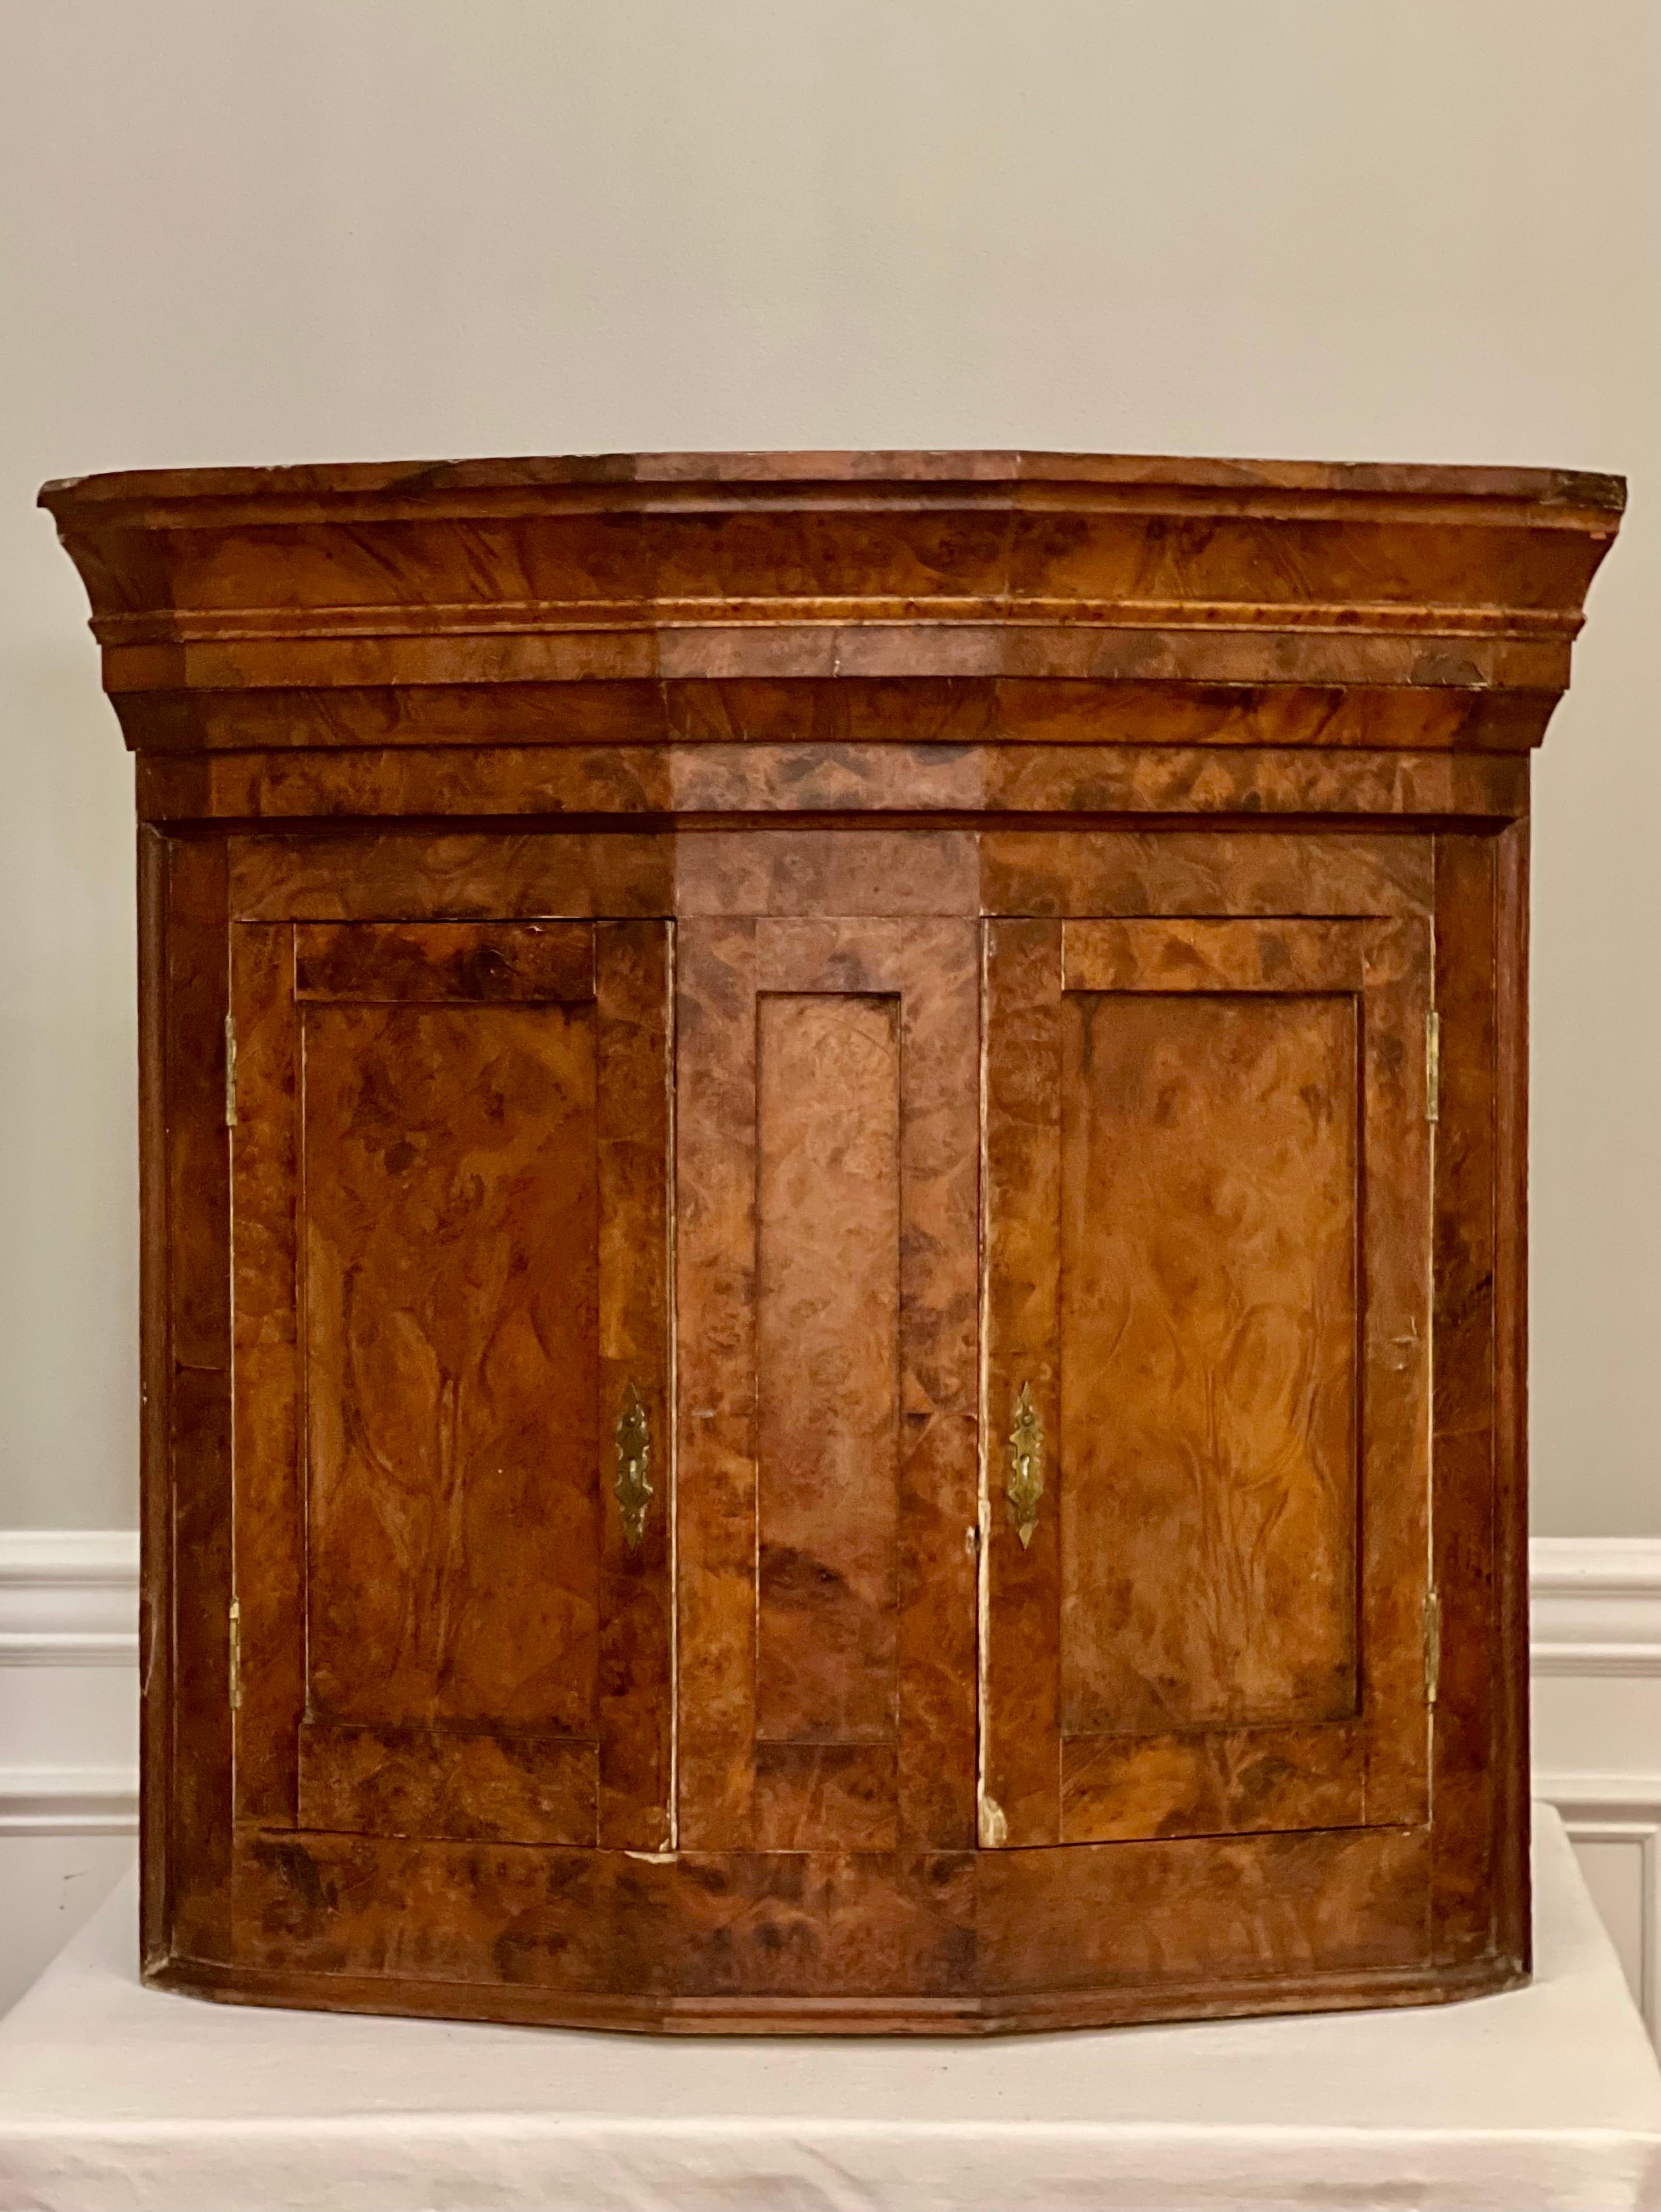 Wonderful 18th century elmwood burl two door hanging corner cupboard.

It features a unique angular shape with a moulded cornice above large paneled doors and center column.  The doors have original tulip bud shaped hardware with key.  The back